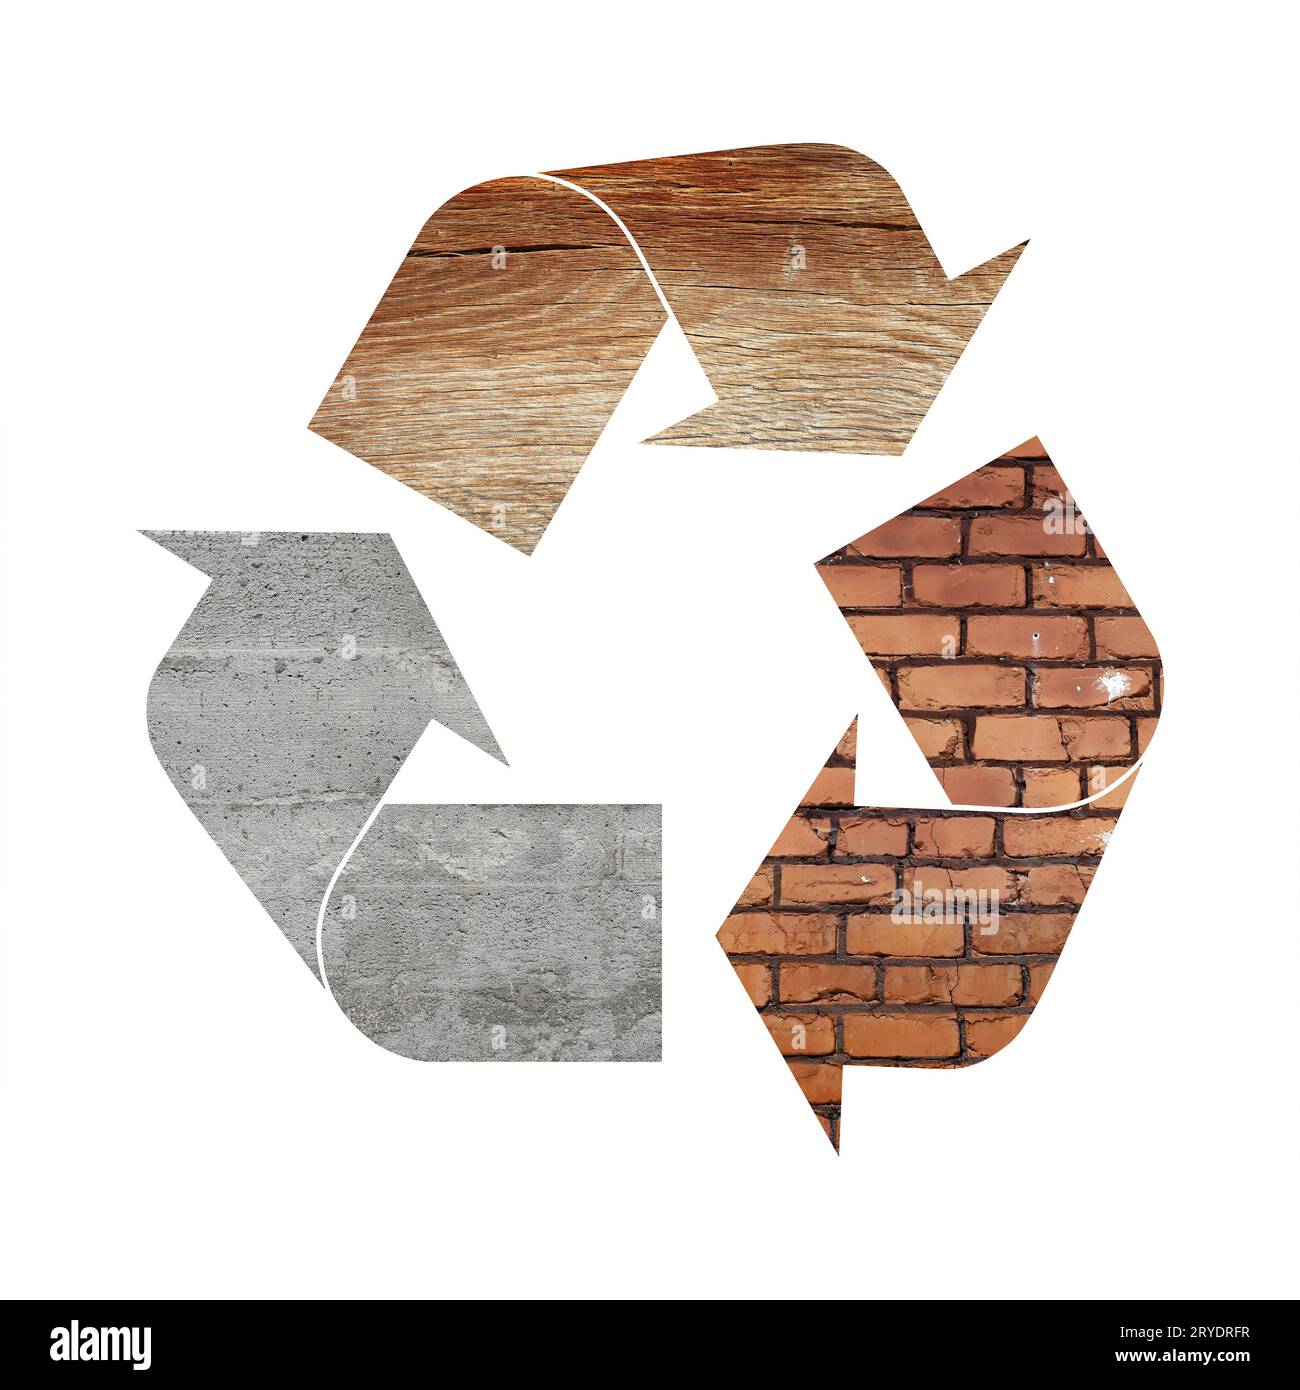 Recycling symbol of concrete, wood and bricks Stock Photo